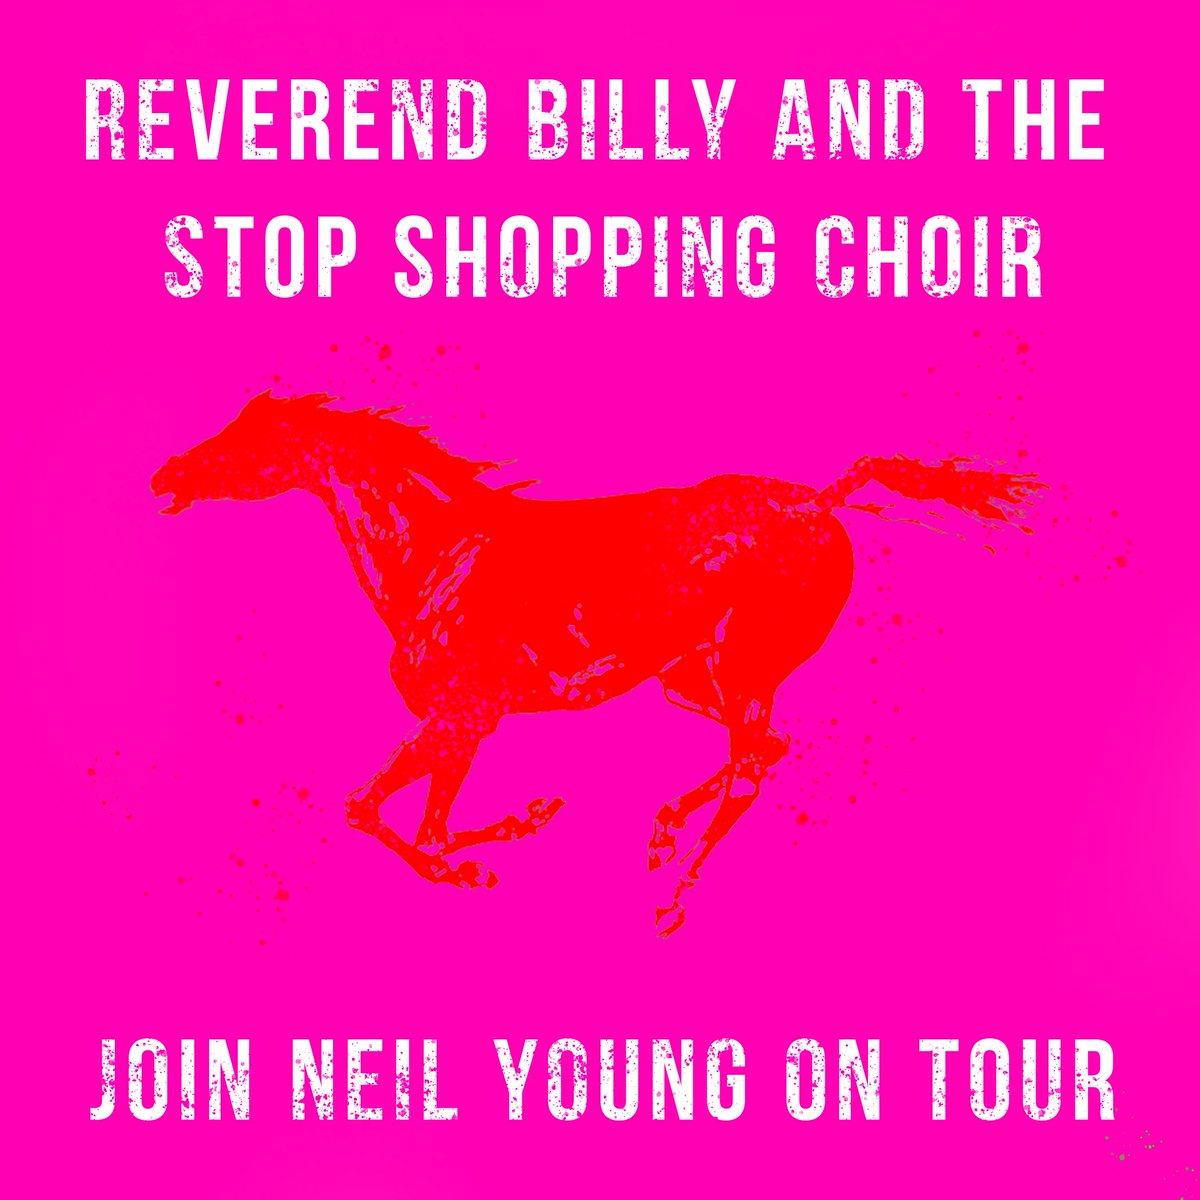 Our tour with @Neilyoung and Crazy Horse is well on it's way - follow our ig @revbillytalen to keep up to date with the latest on the road